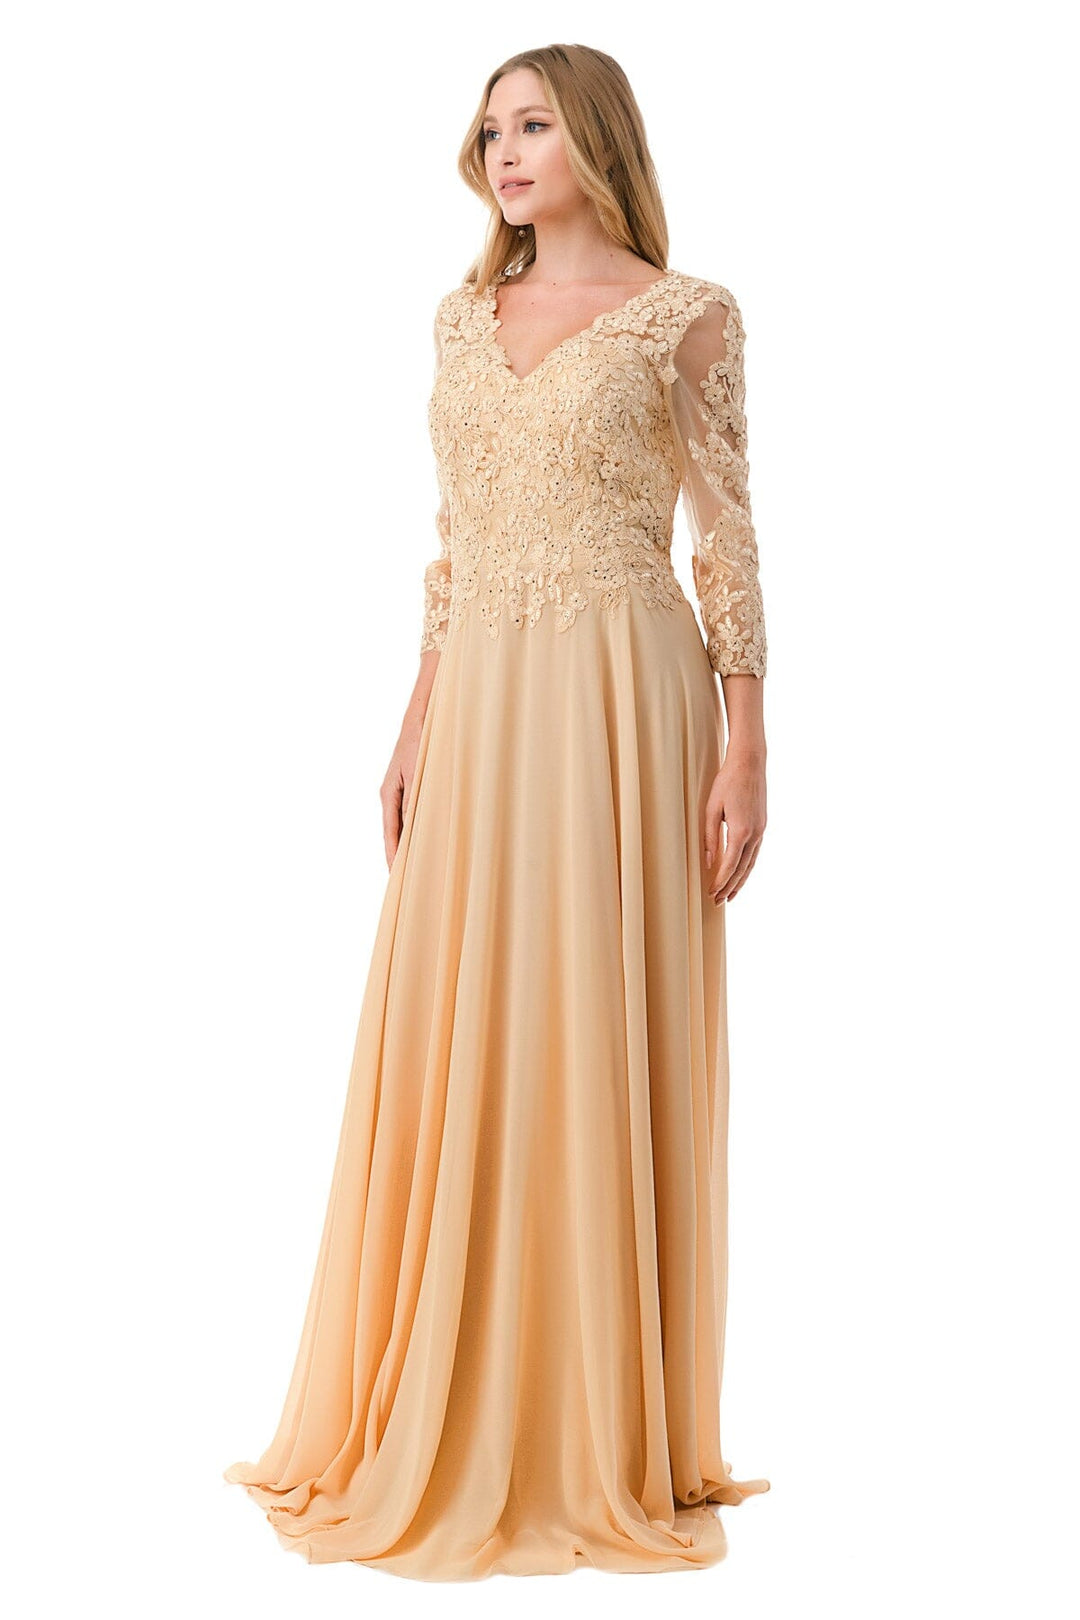 Applique 3/4 Sleeve A-line Gown by Coya M2758Q